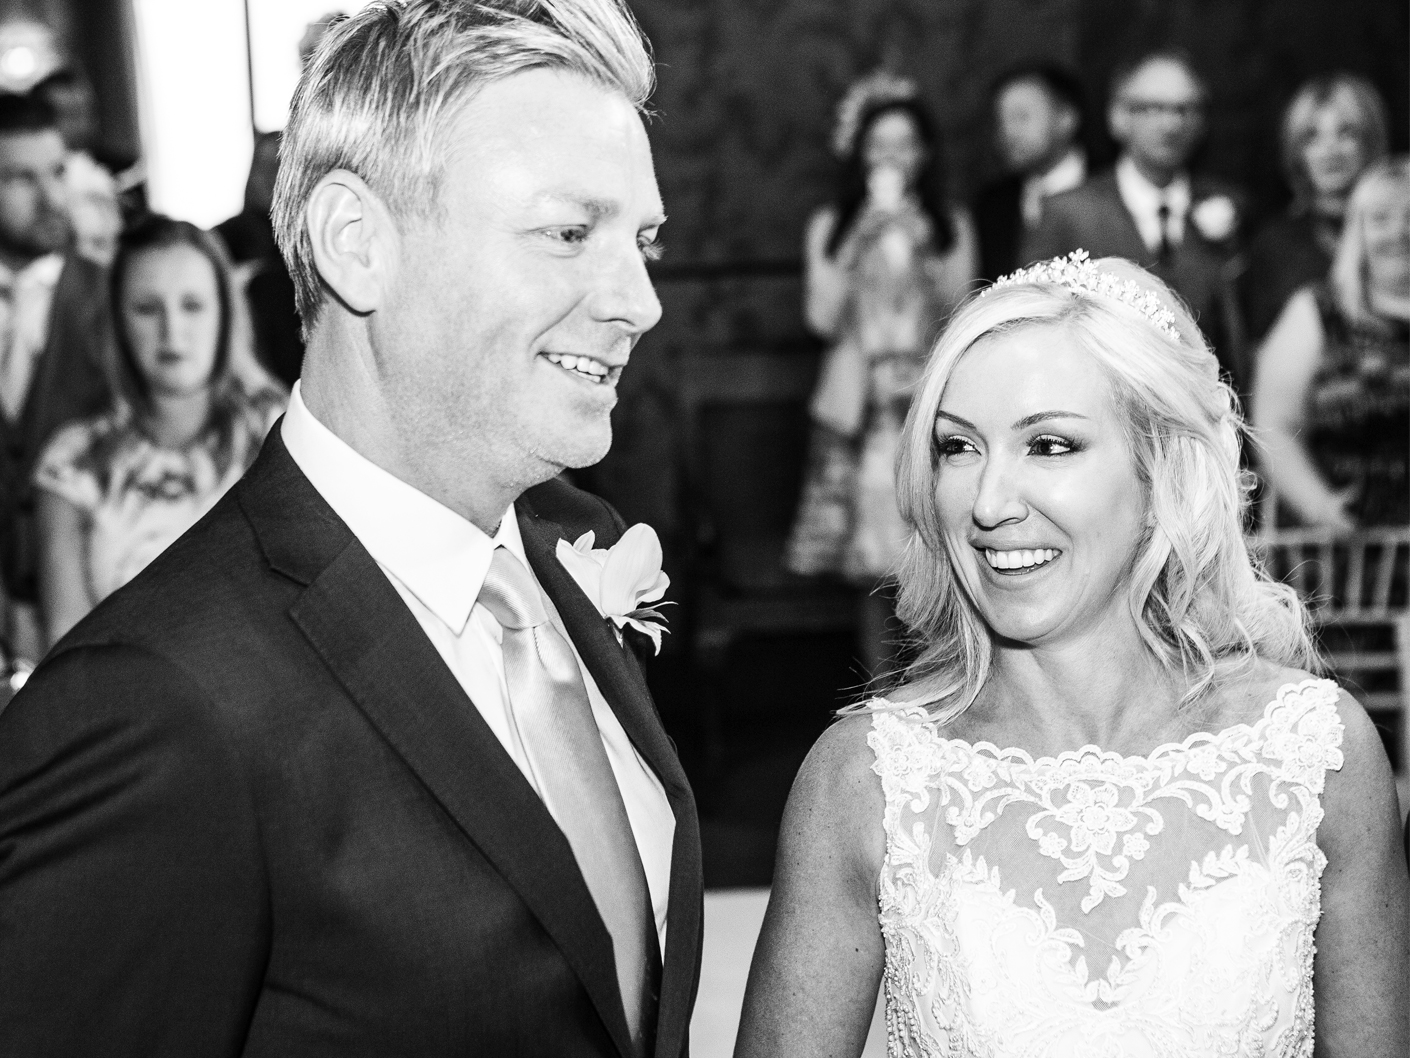 photography-of-the-bride-and-groom-at-the-ceremony-at-the-belle-epoque-knutsford-cheshire